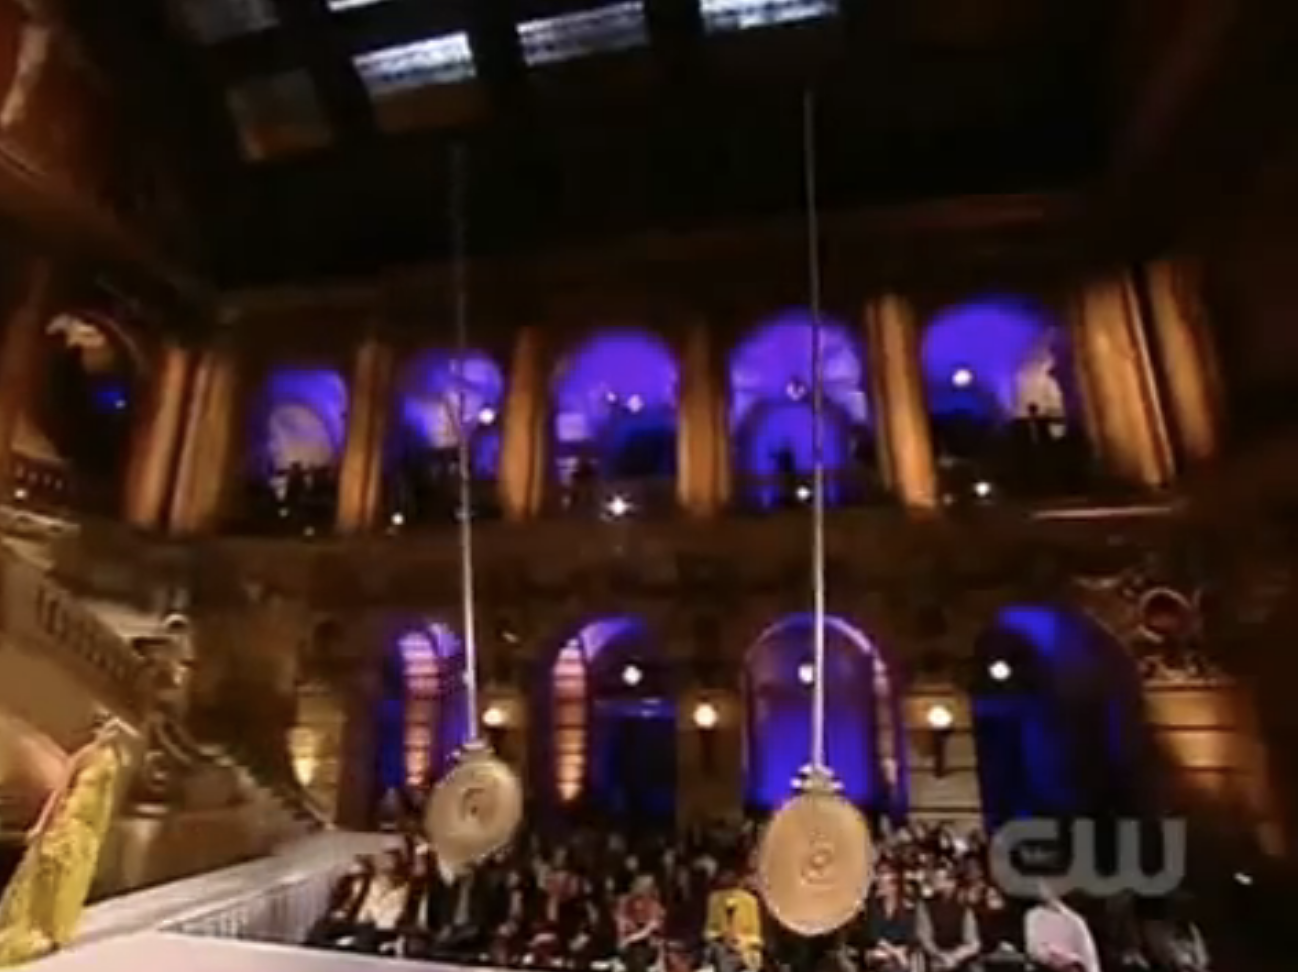 A contestant walks down a runway with two swinging pendulums